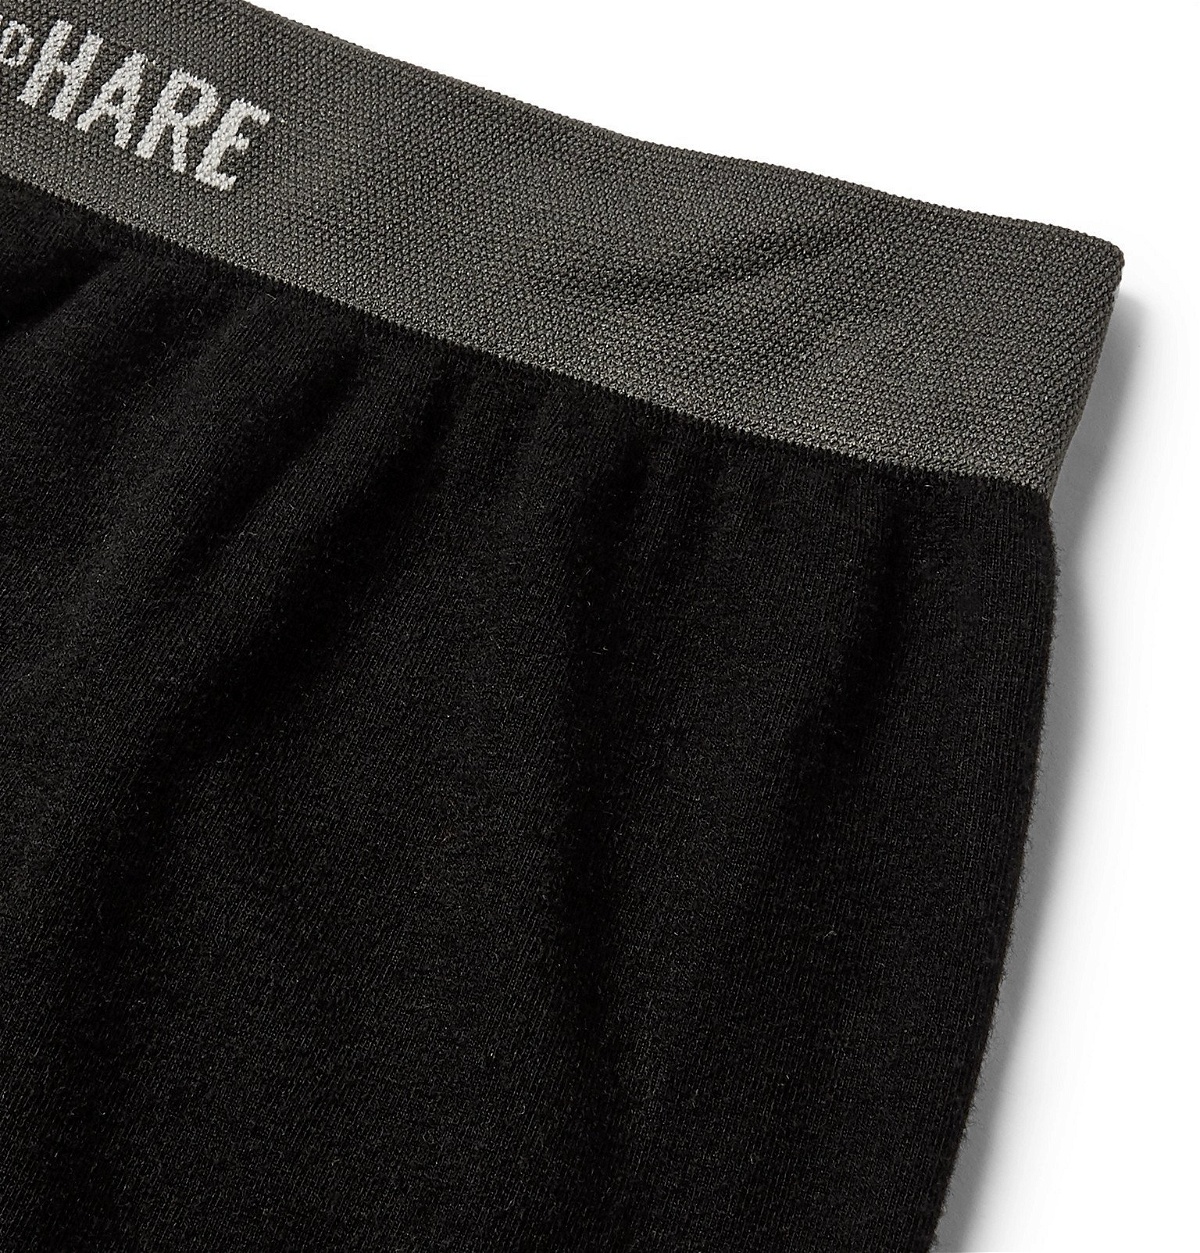 Hamilton and Hare - Pack of Five Bamboo-Blend Boxer Briefs - Black ...